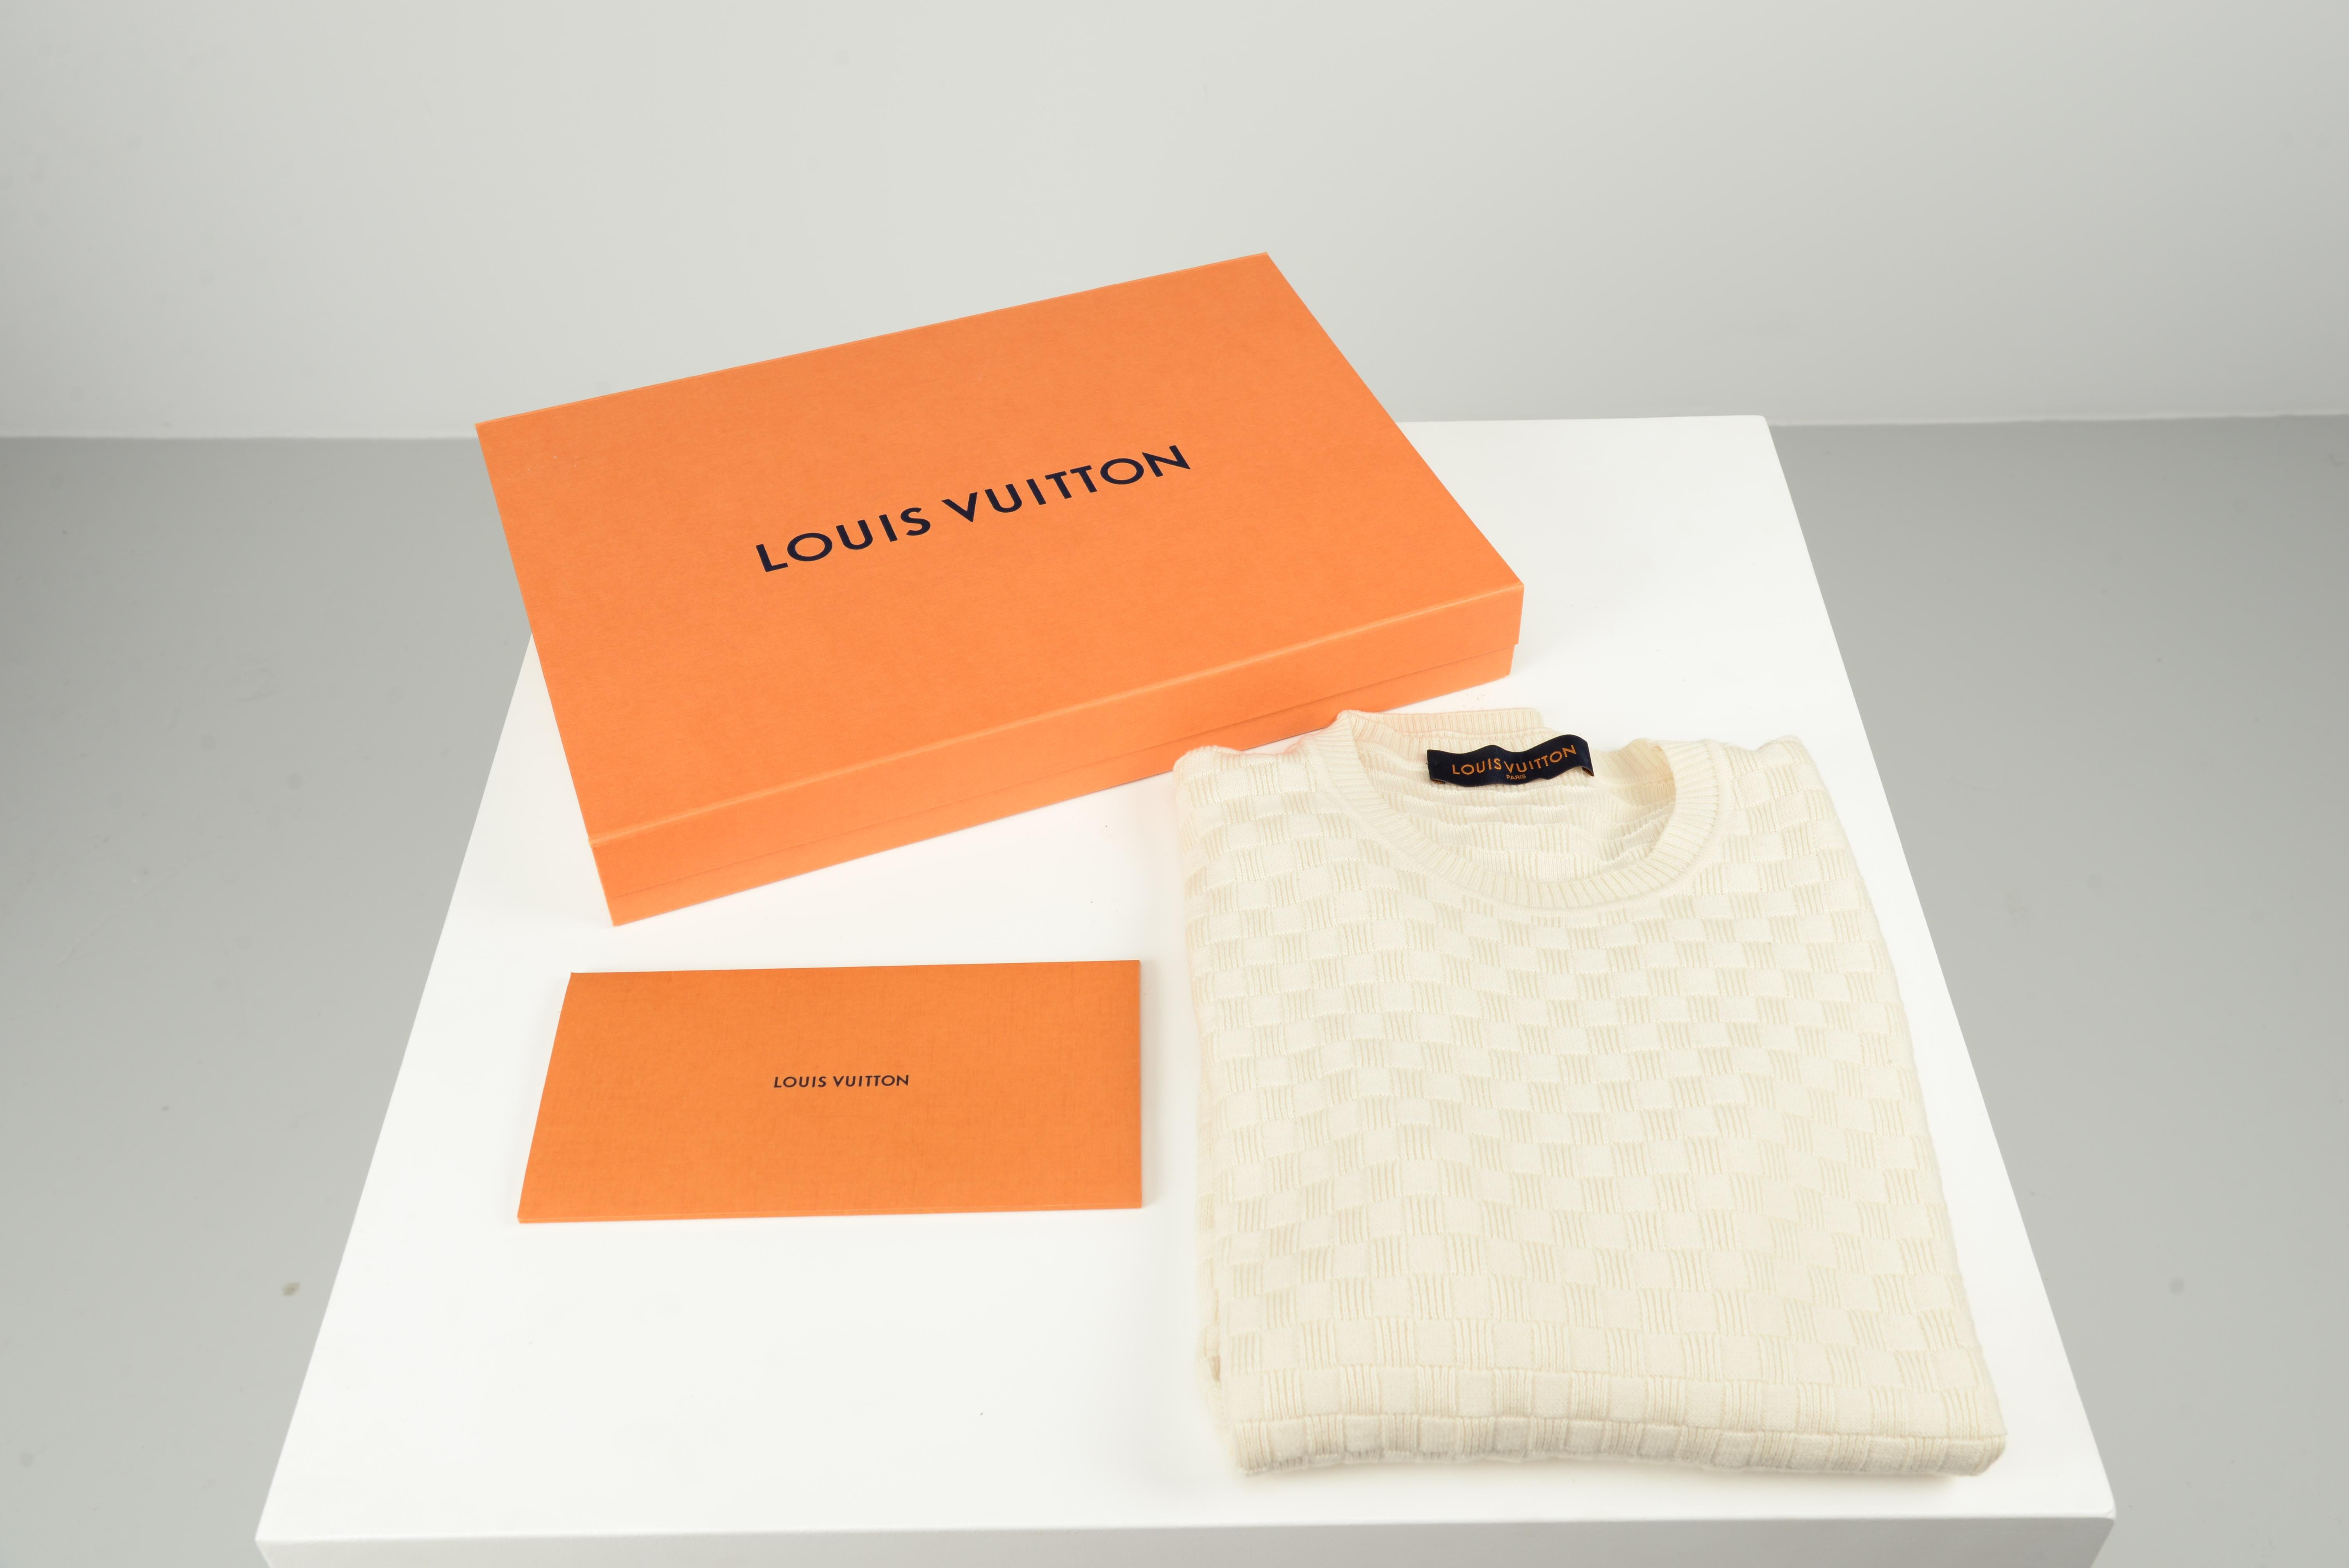 From the collection of SAVINETI we offer this Louis Vuitton Damier Crew Neck Sweater:
-	Brand: Louis Vuitton
-	Model: Damier Sweater
-	Year: 2021
-	Condition: as new
-	Materials: 50% Cotton, 50% Wool
-	Extras: comes with the original box & invoice
-